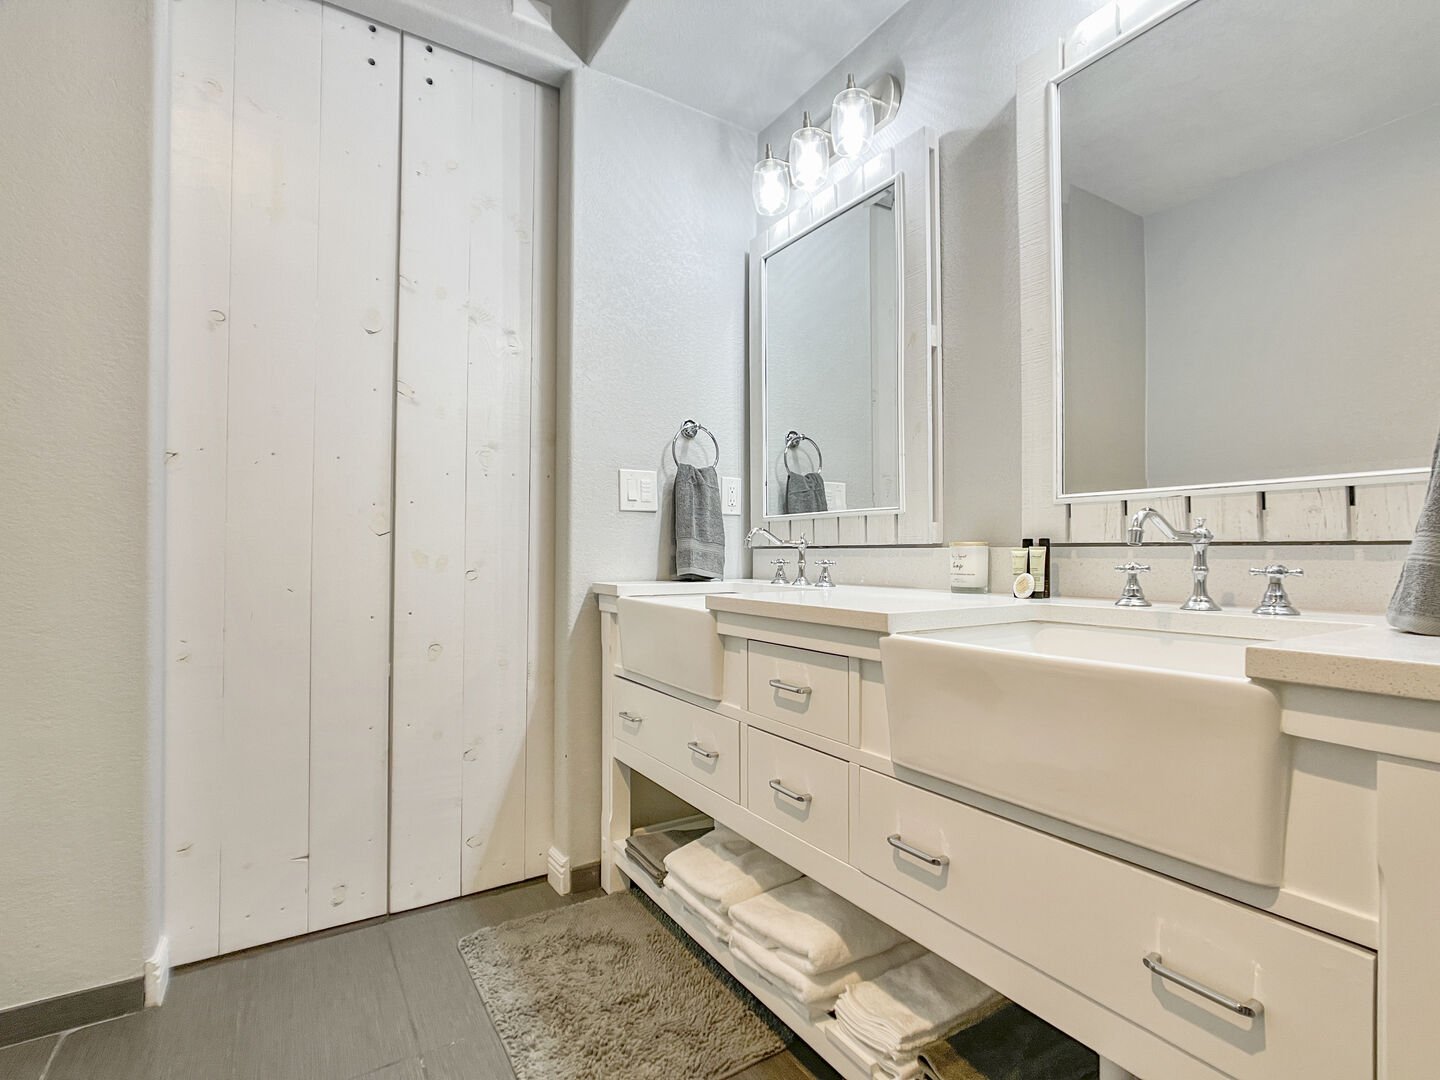 Double vanity with ample lighting in lux bathroom!